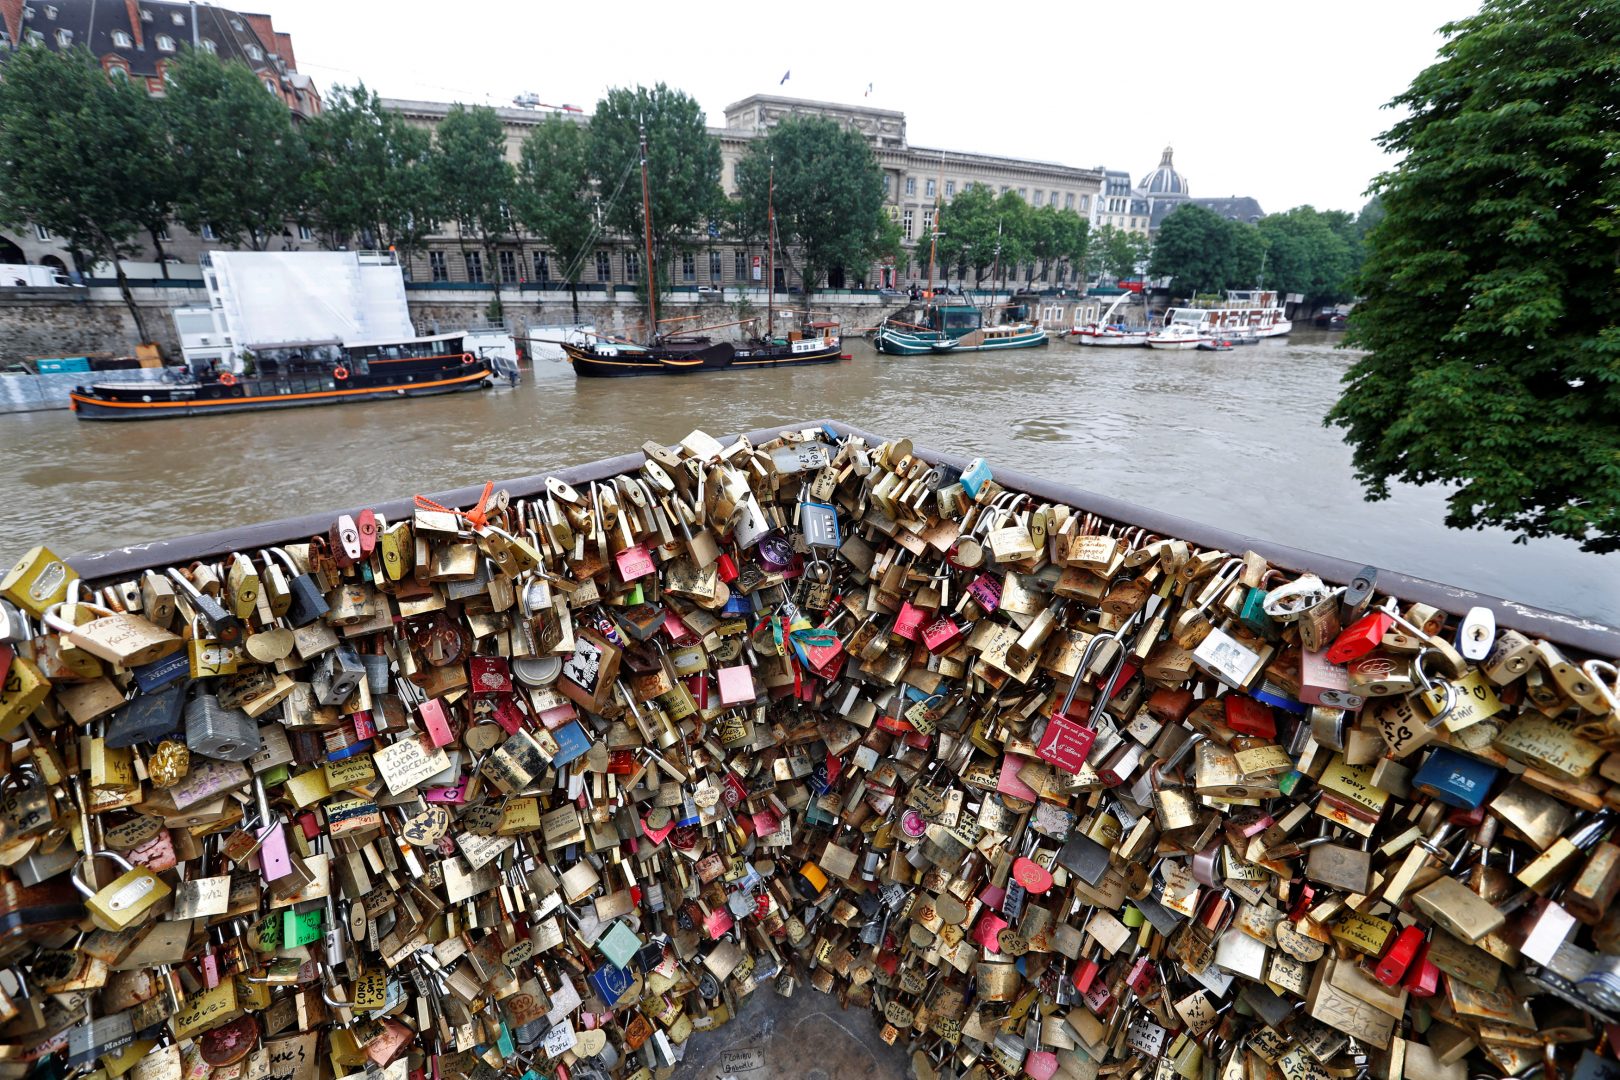 Padlocks clipped by lovers are seen in front of the flooded river-side of the River Seine in Paris, France, June 1, 2016. REUTERS/Charles Platiau